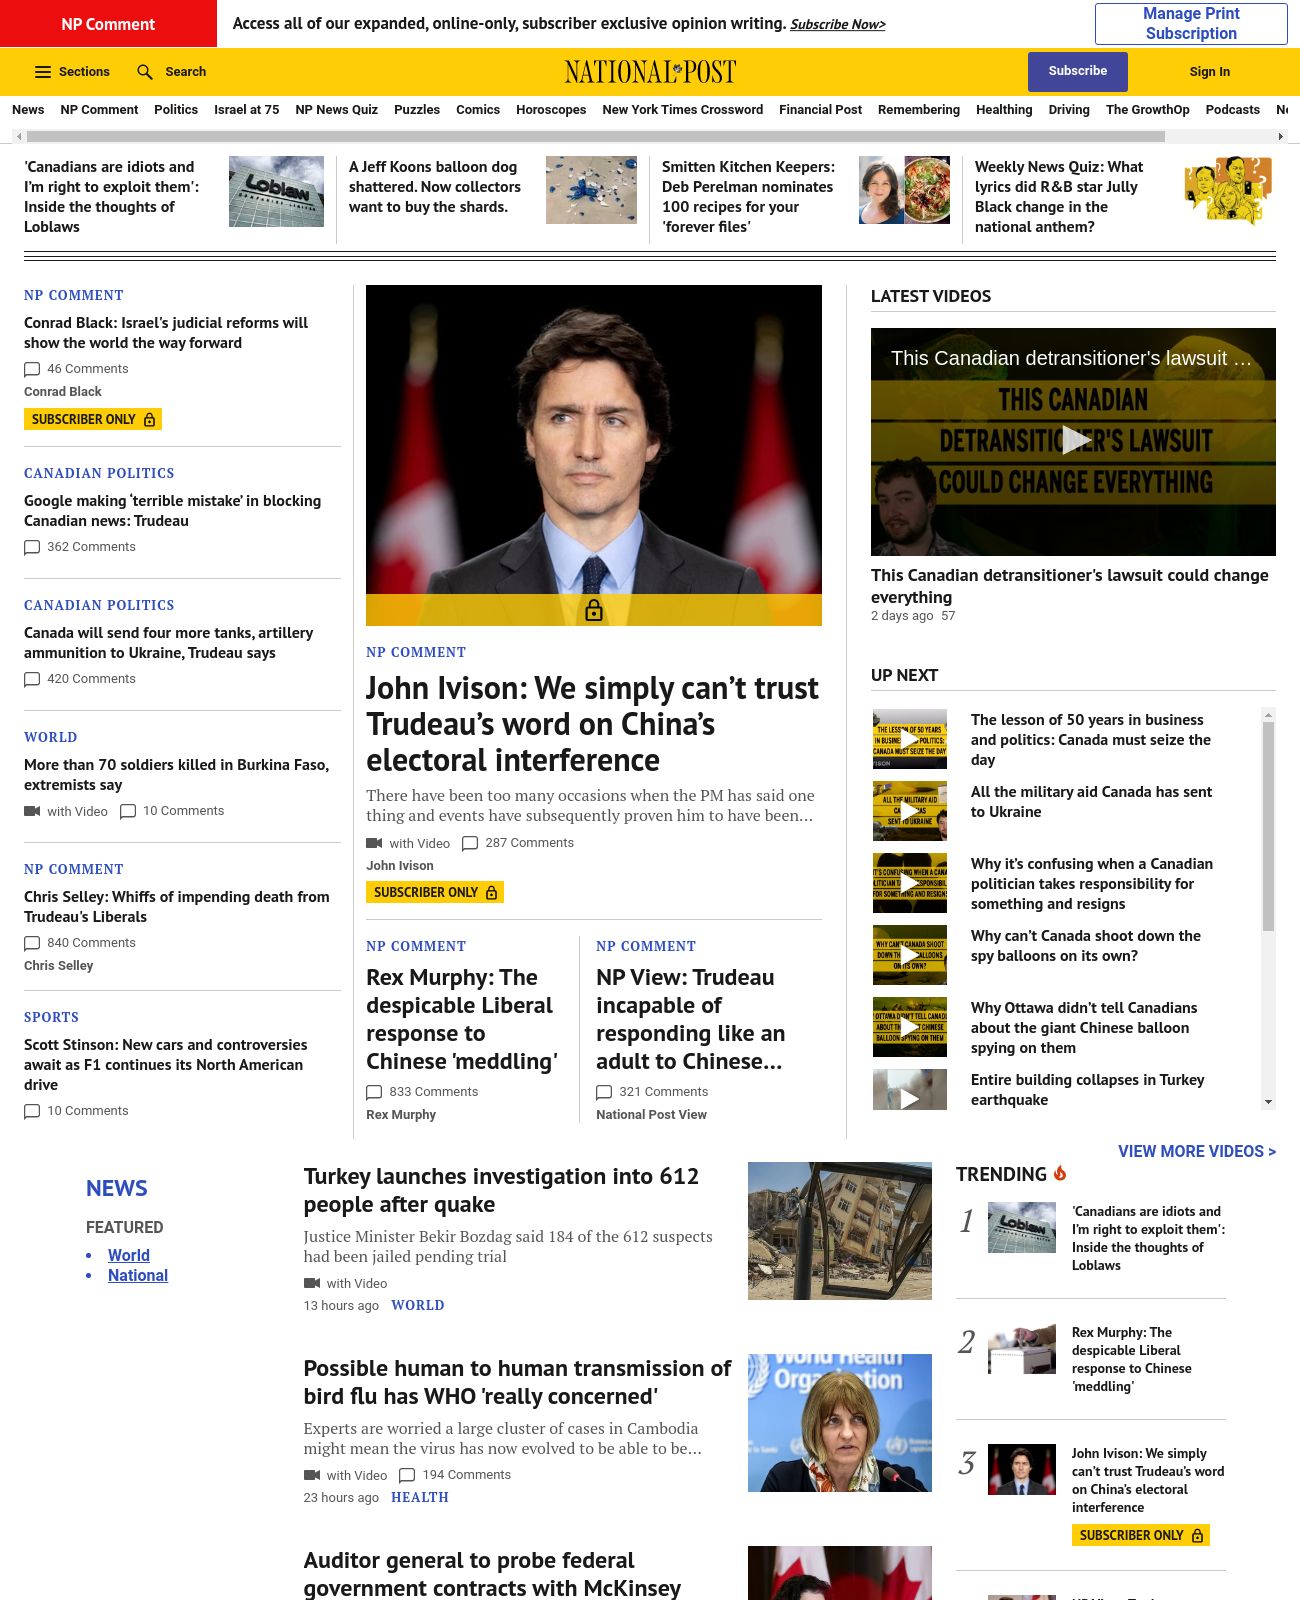 National Post at 2023-02-25 22:37:22-05:00 local time